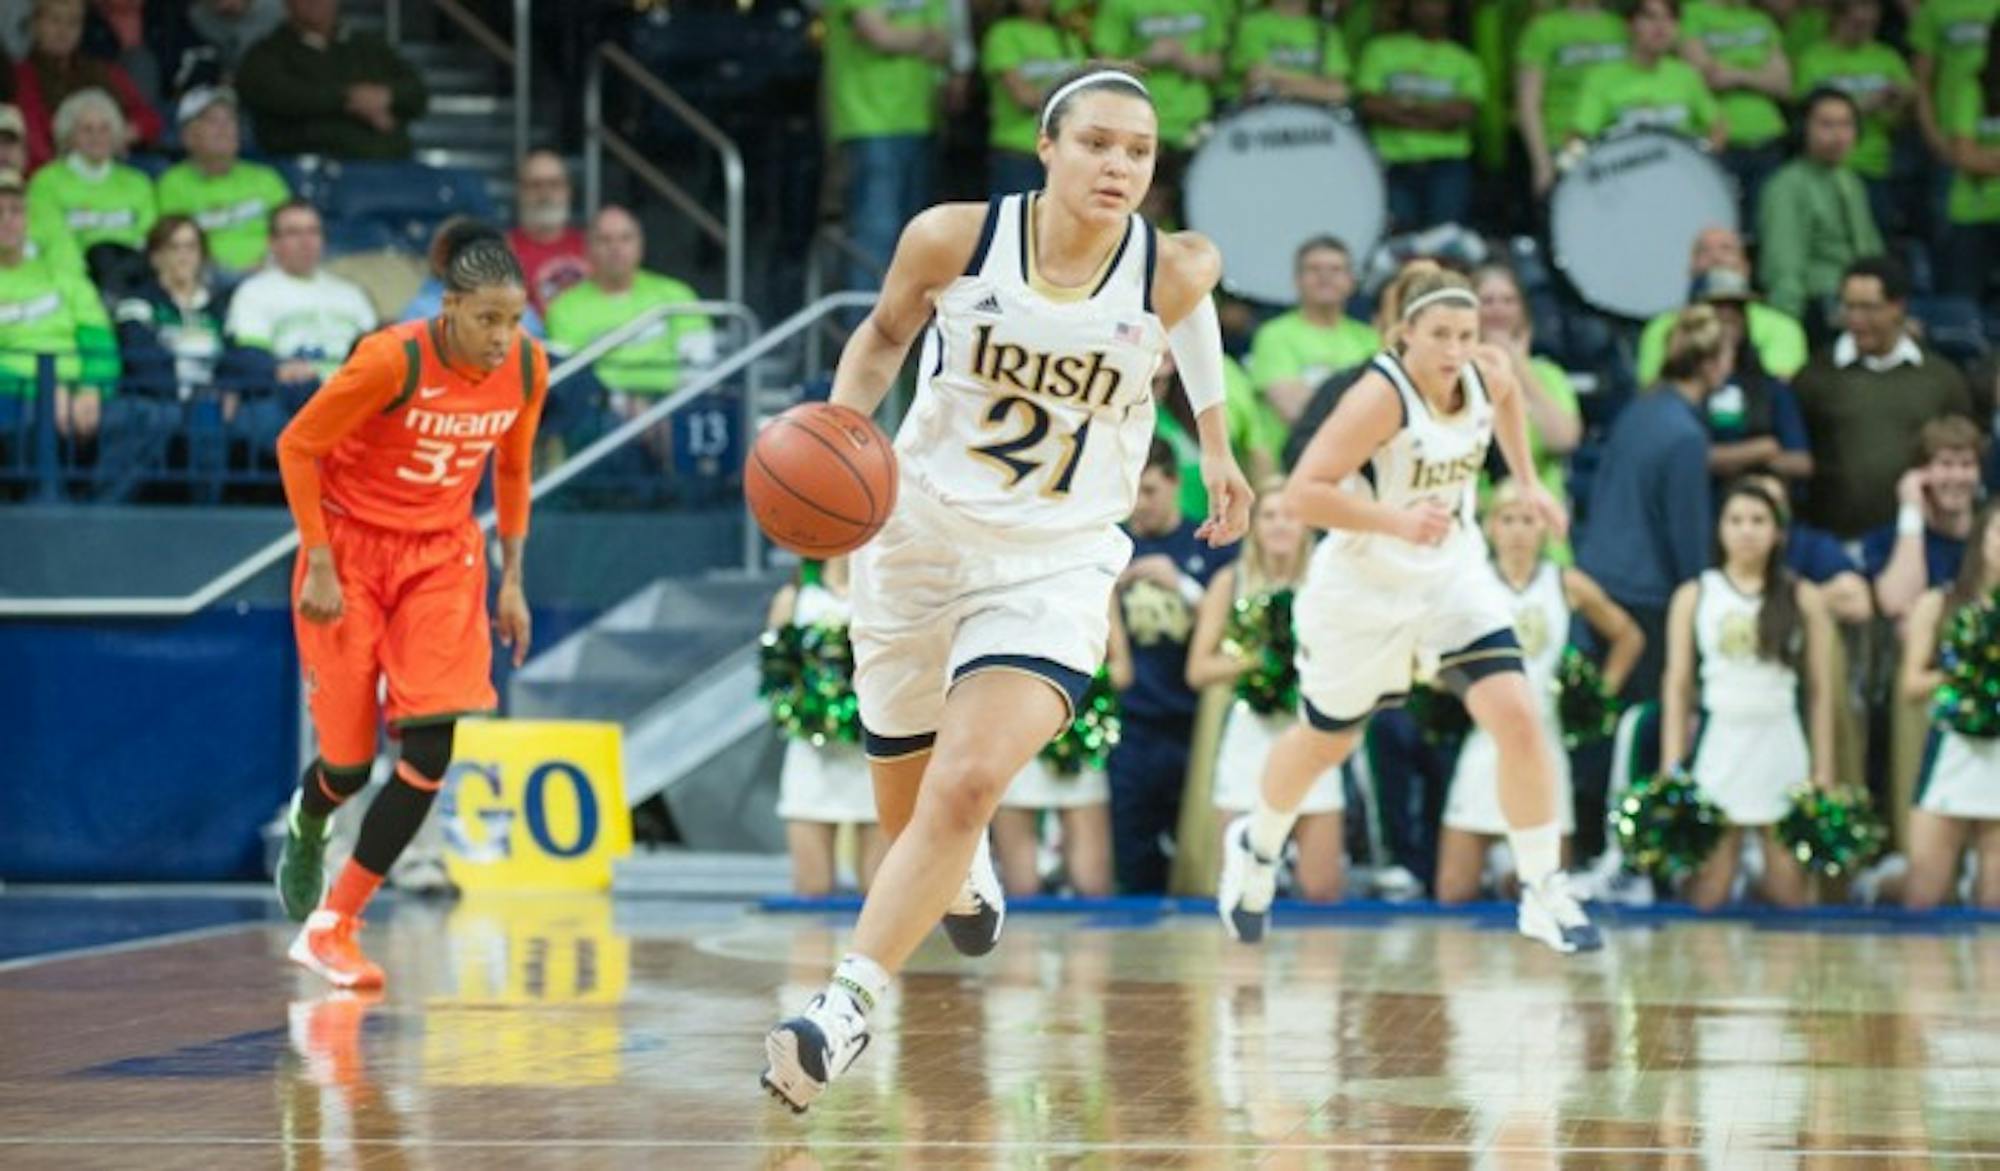 Former Irish guard Kayla McBride dribbles the ball up the court during Notre Dame’s 72-59 win over  Miami on Jan. 23, 2014 at Purcell Pavilion. McBride currently plays for the San Antonio Stars.